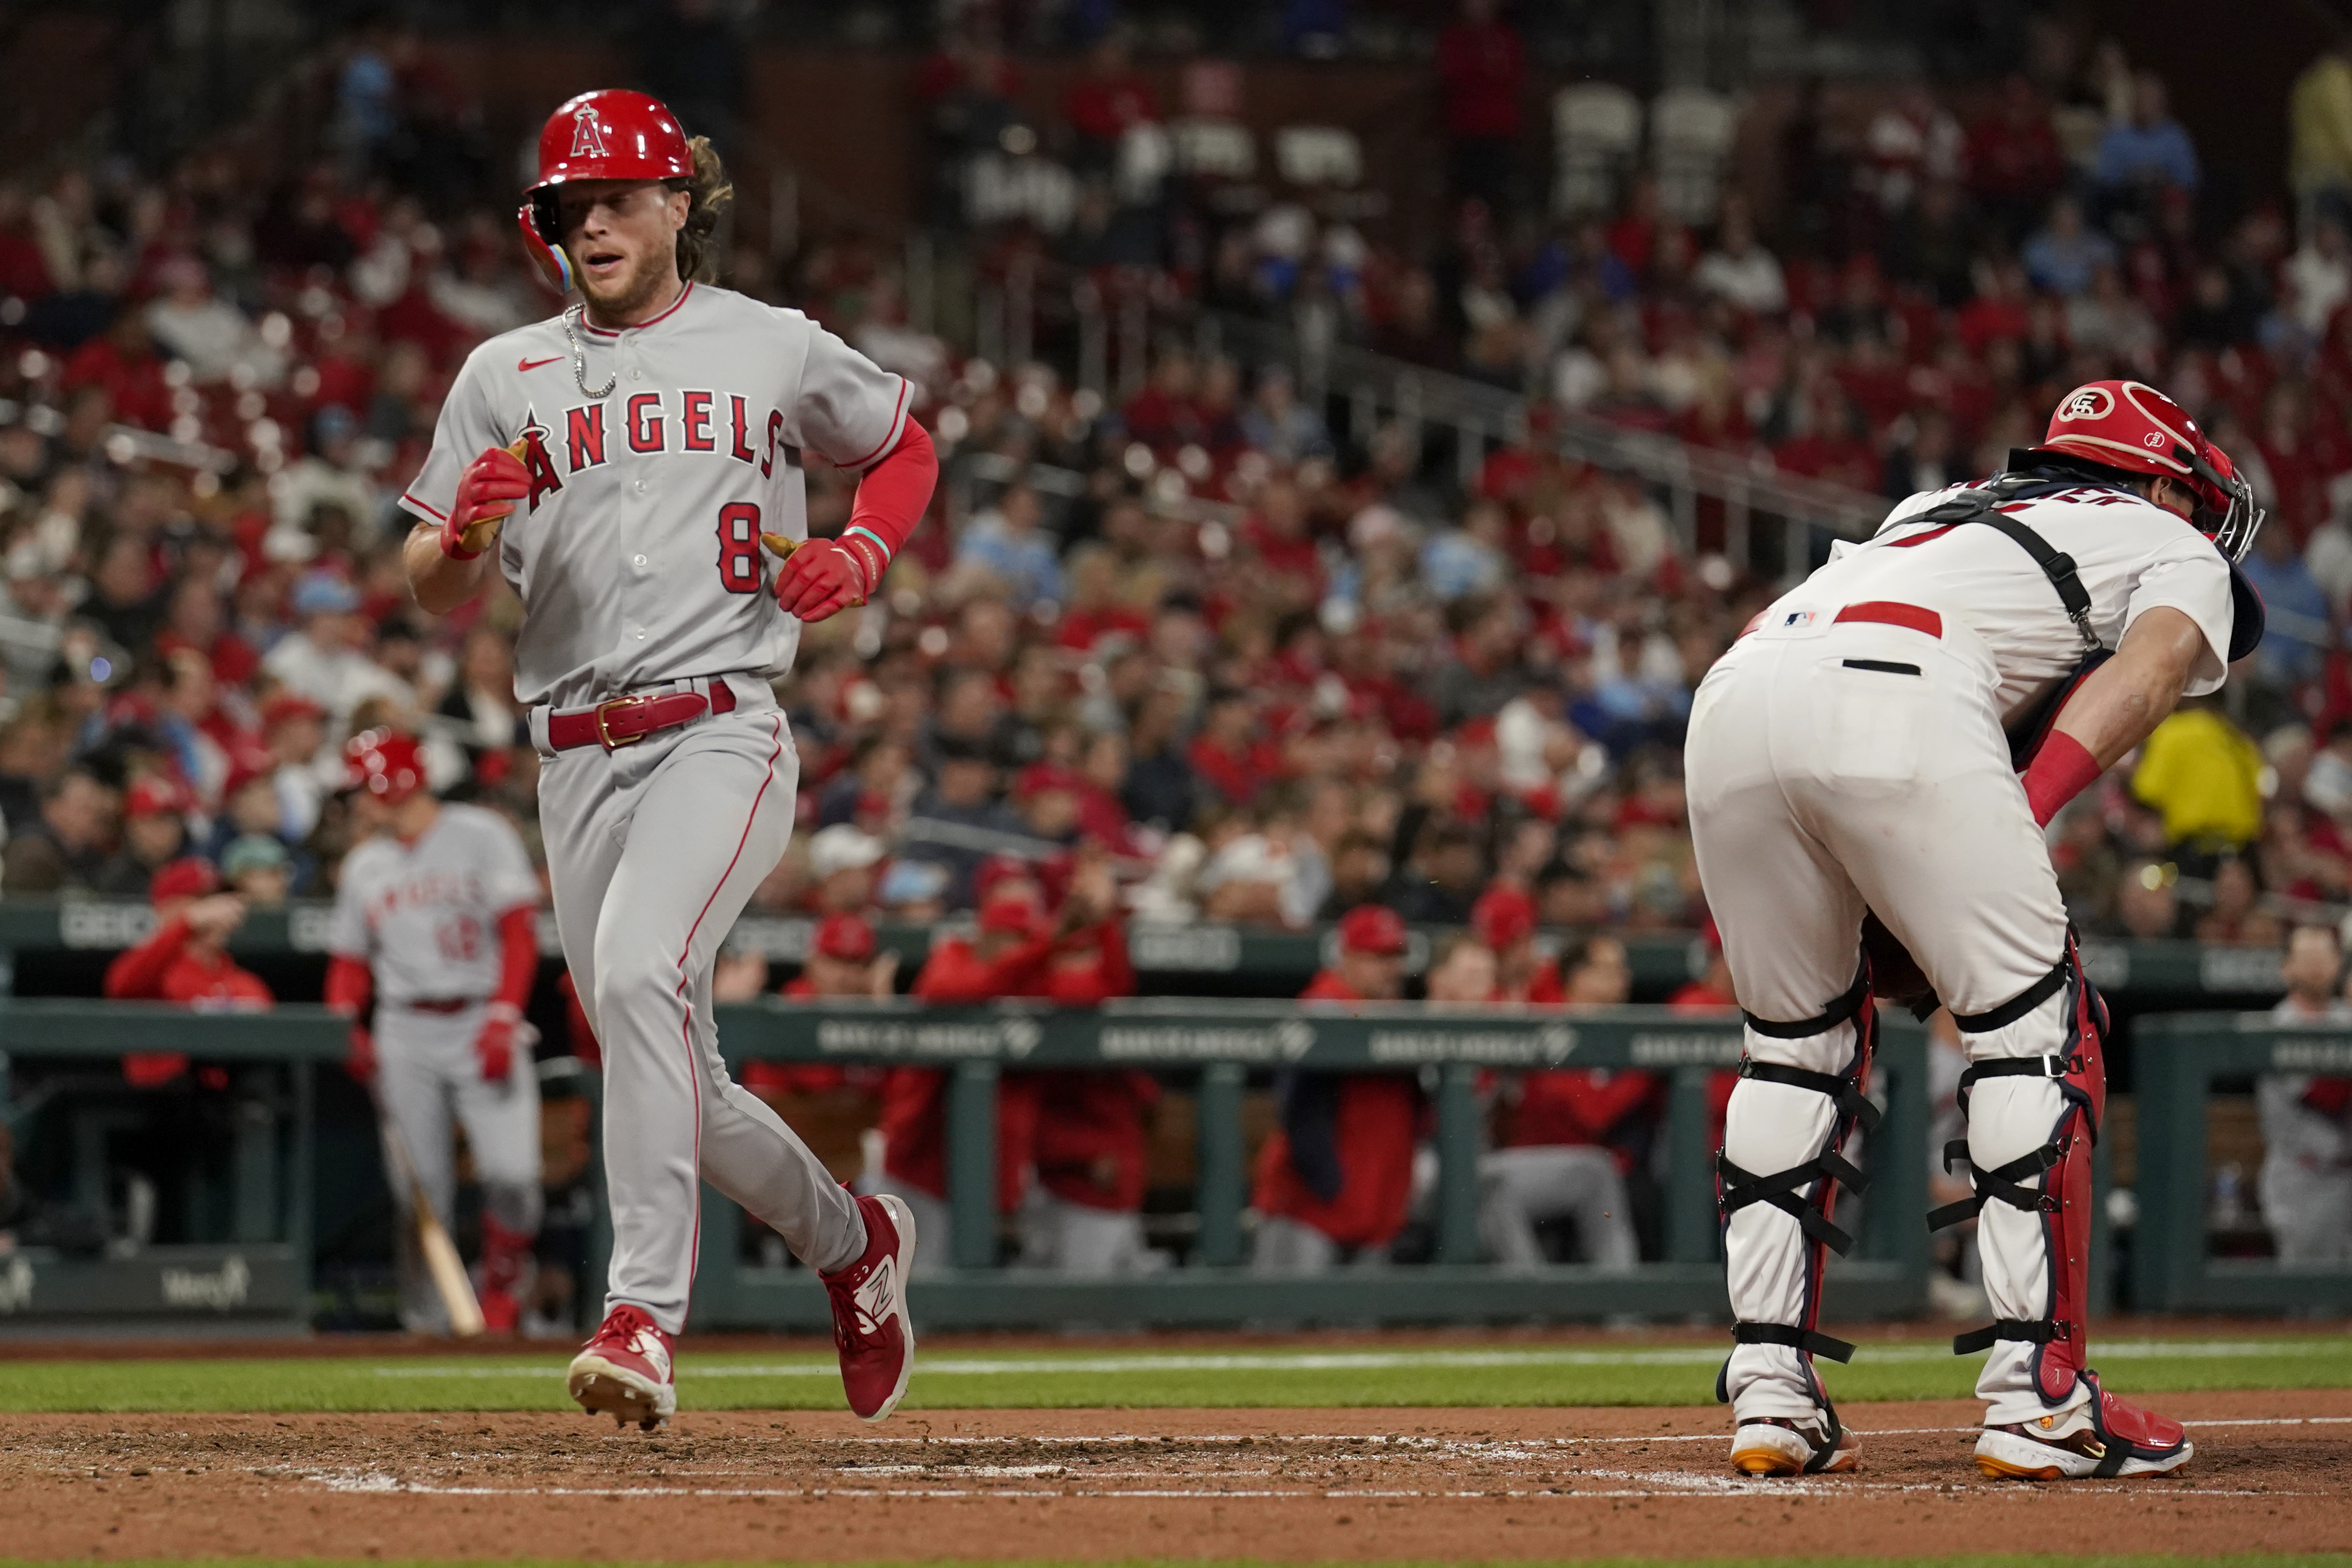 Ward's homer leads Angels to win, Cards' 4th loss in row